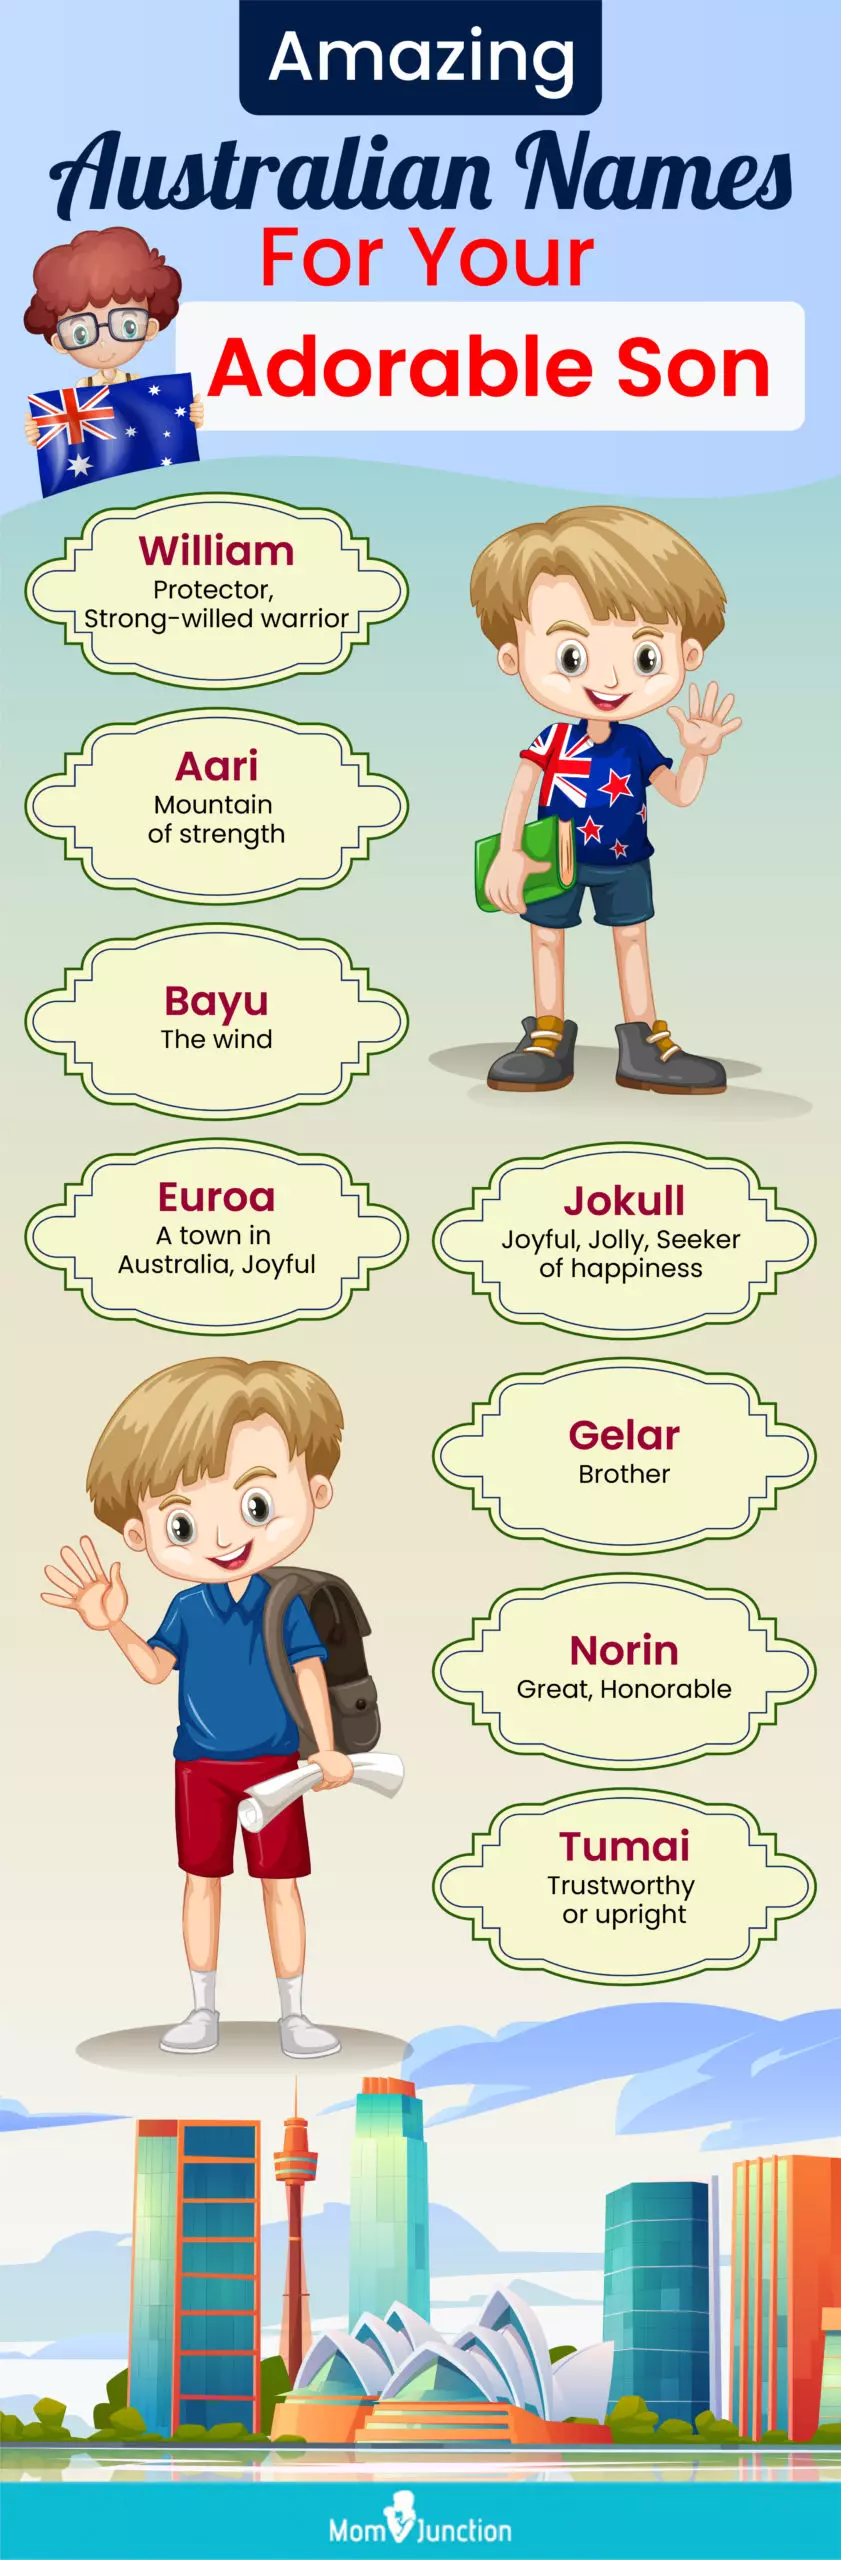 amazing australian names for your adorable son (infographic)